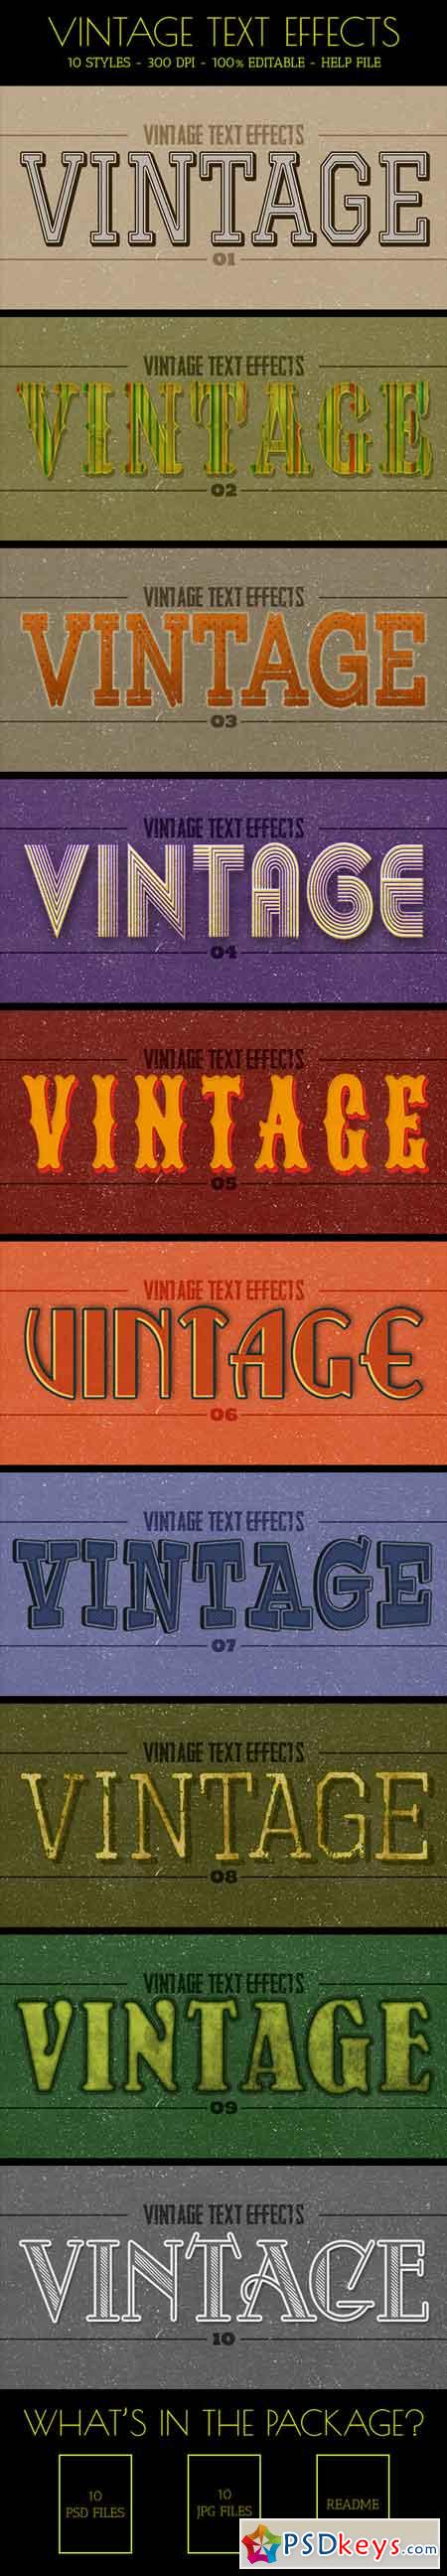 10 Vintage Text Effects 10848058